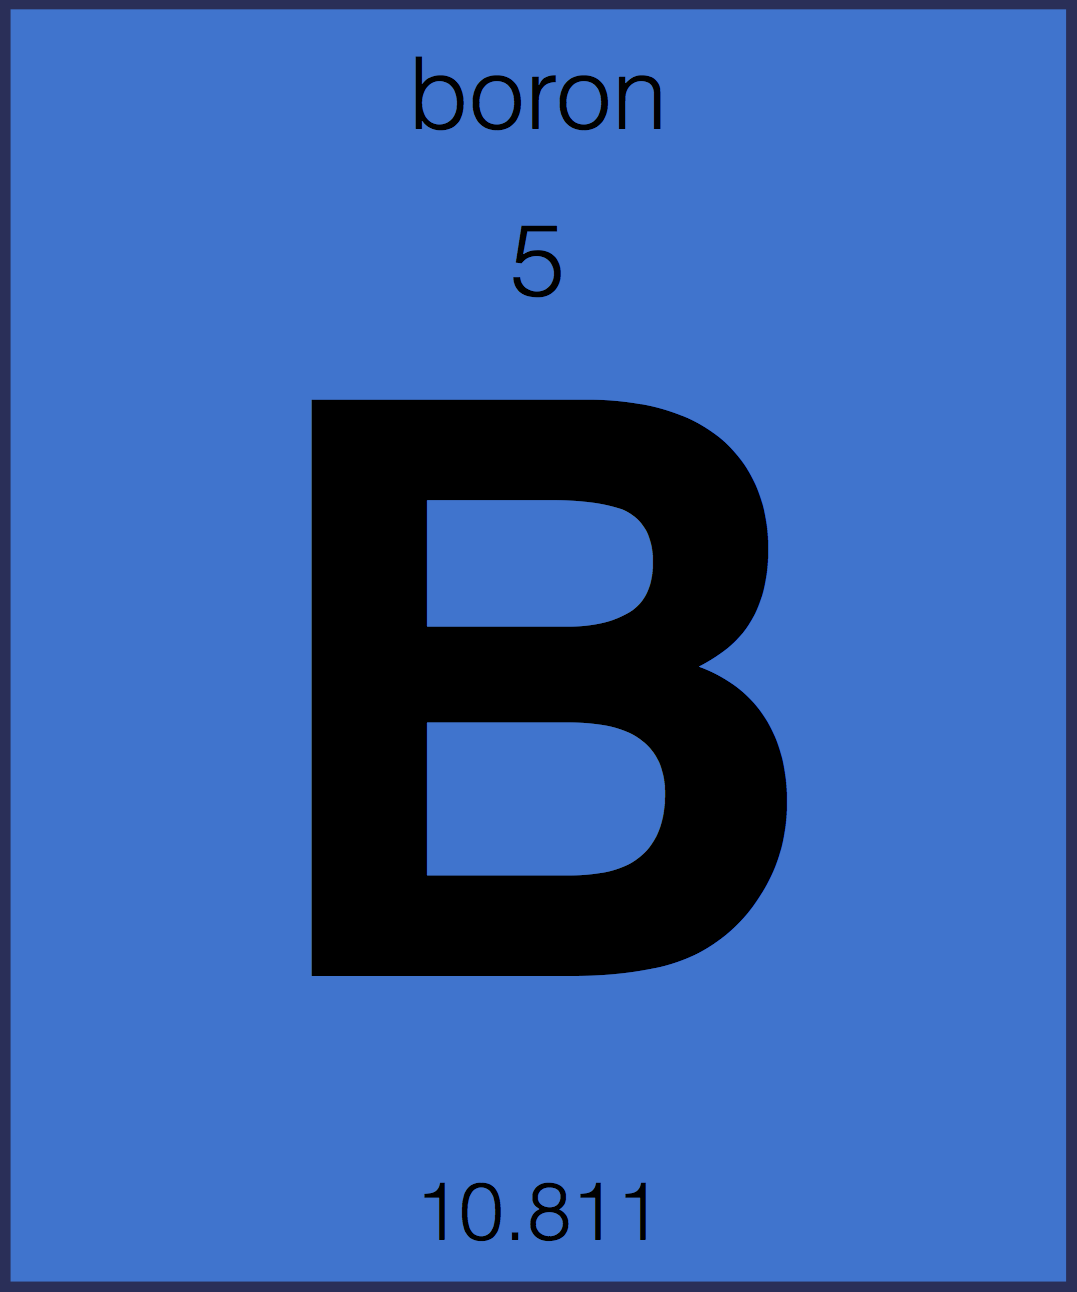 This is a picture of BORON.